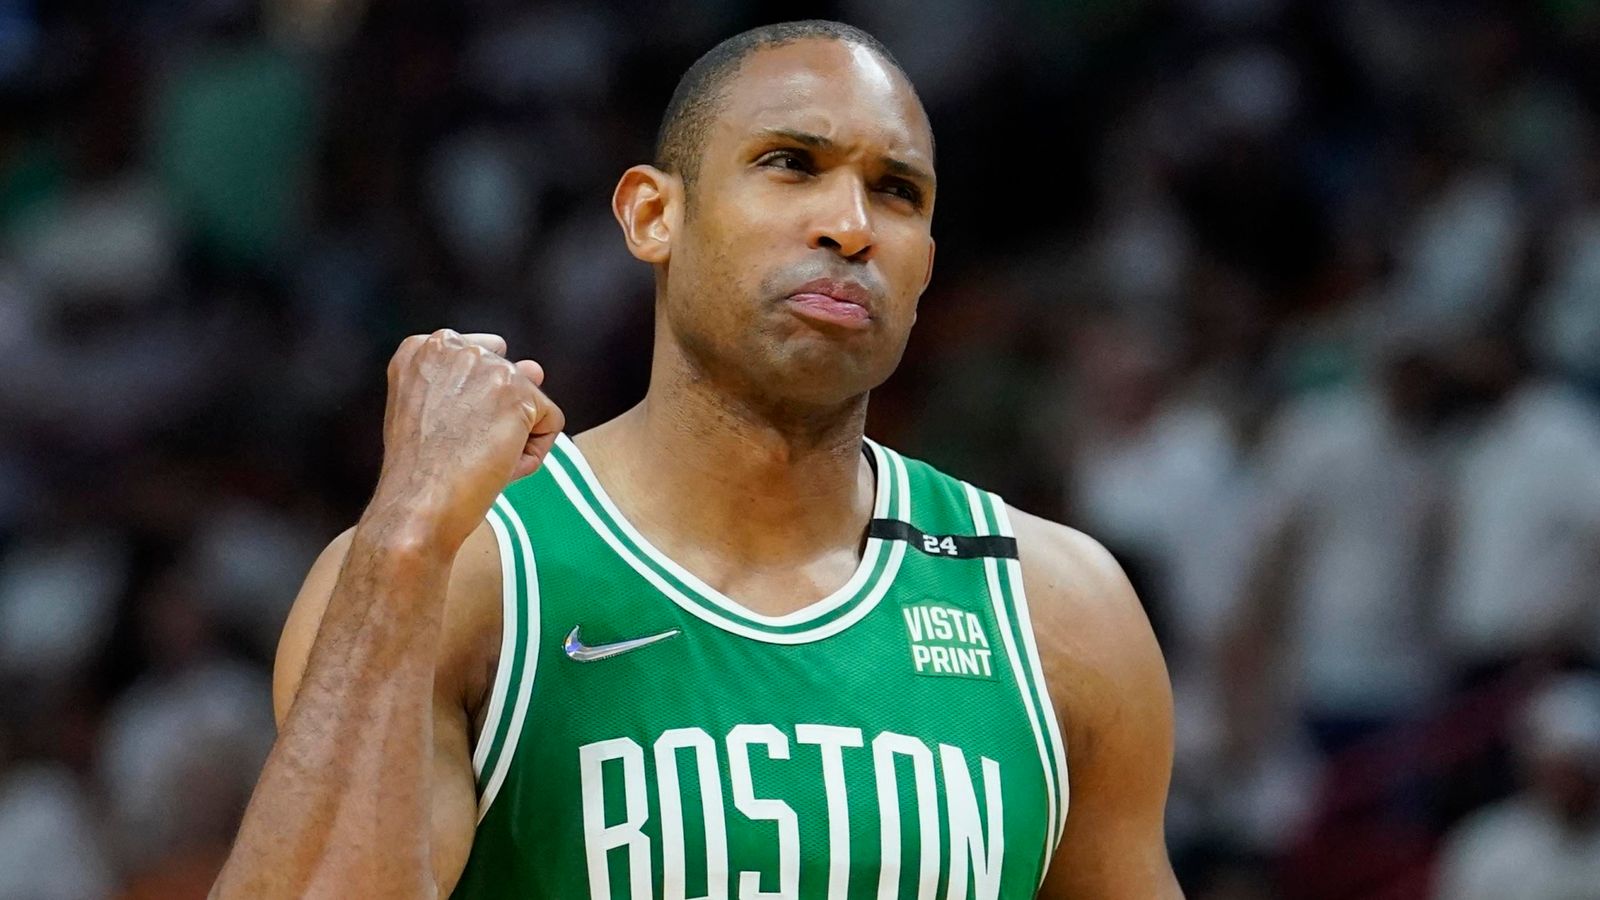 Celtics: Al Horford, Boston's only healthy All-Star, now leads the